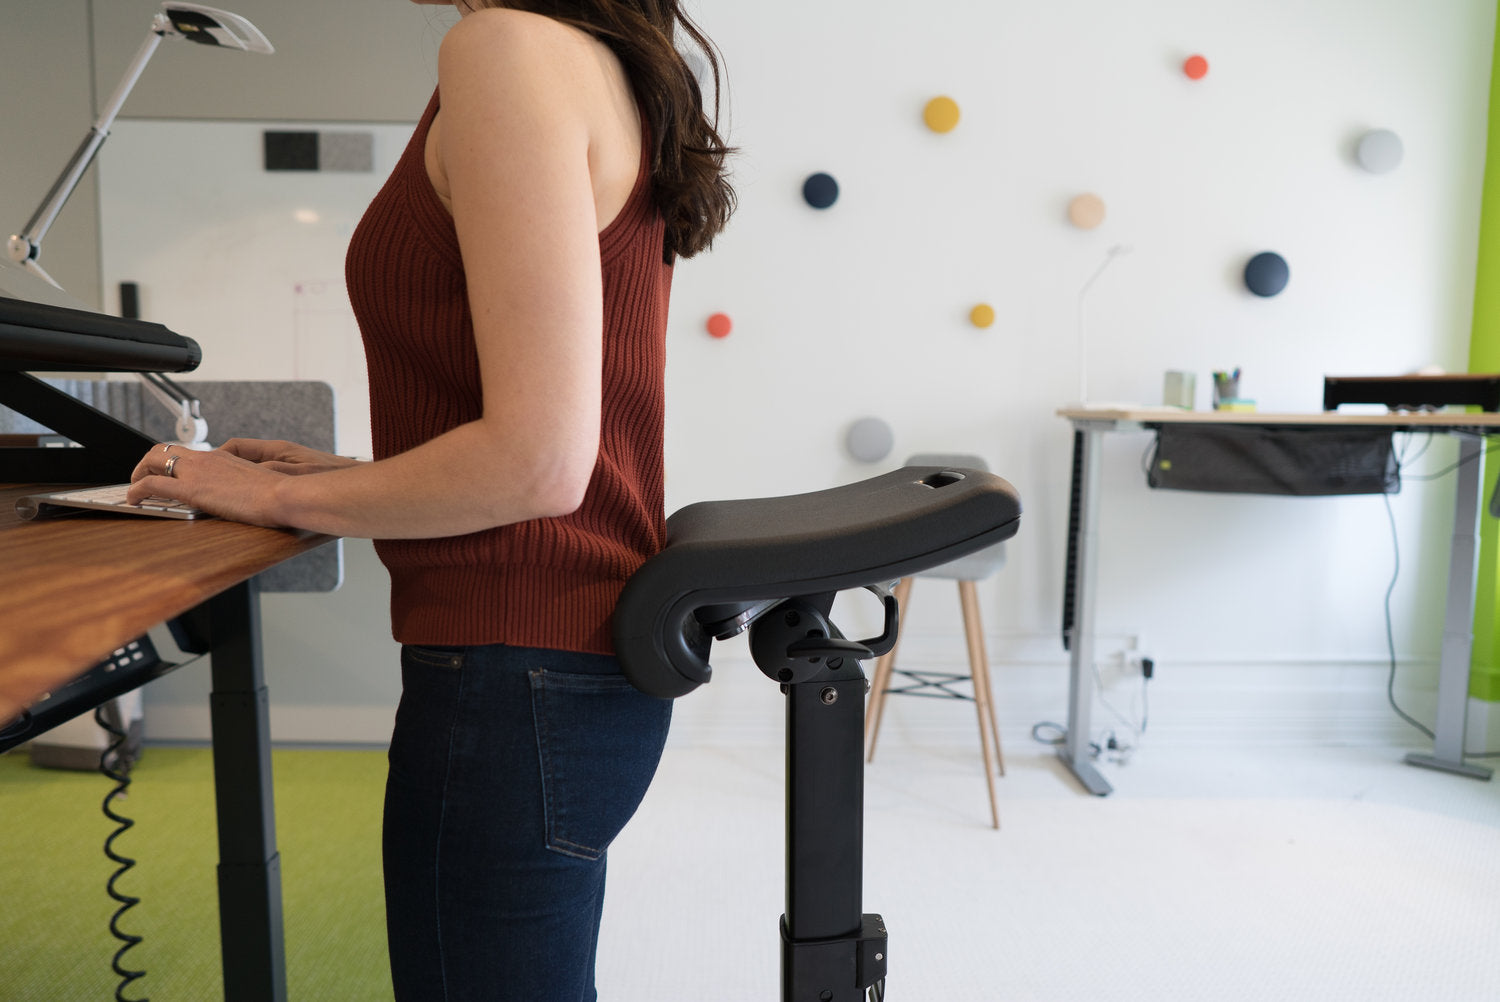 6 Powerful Reasons To Not Throw In The Towel on Your New Standing Desk - Ergo Impact